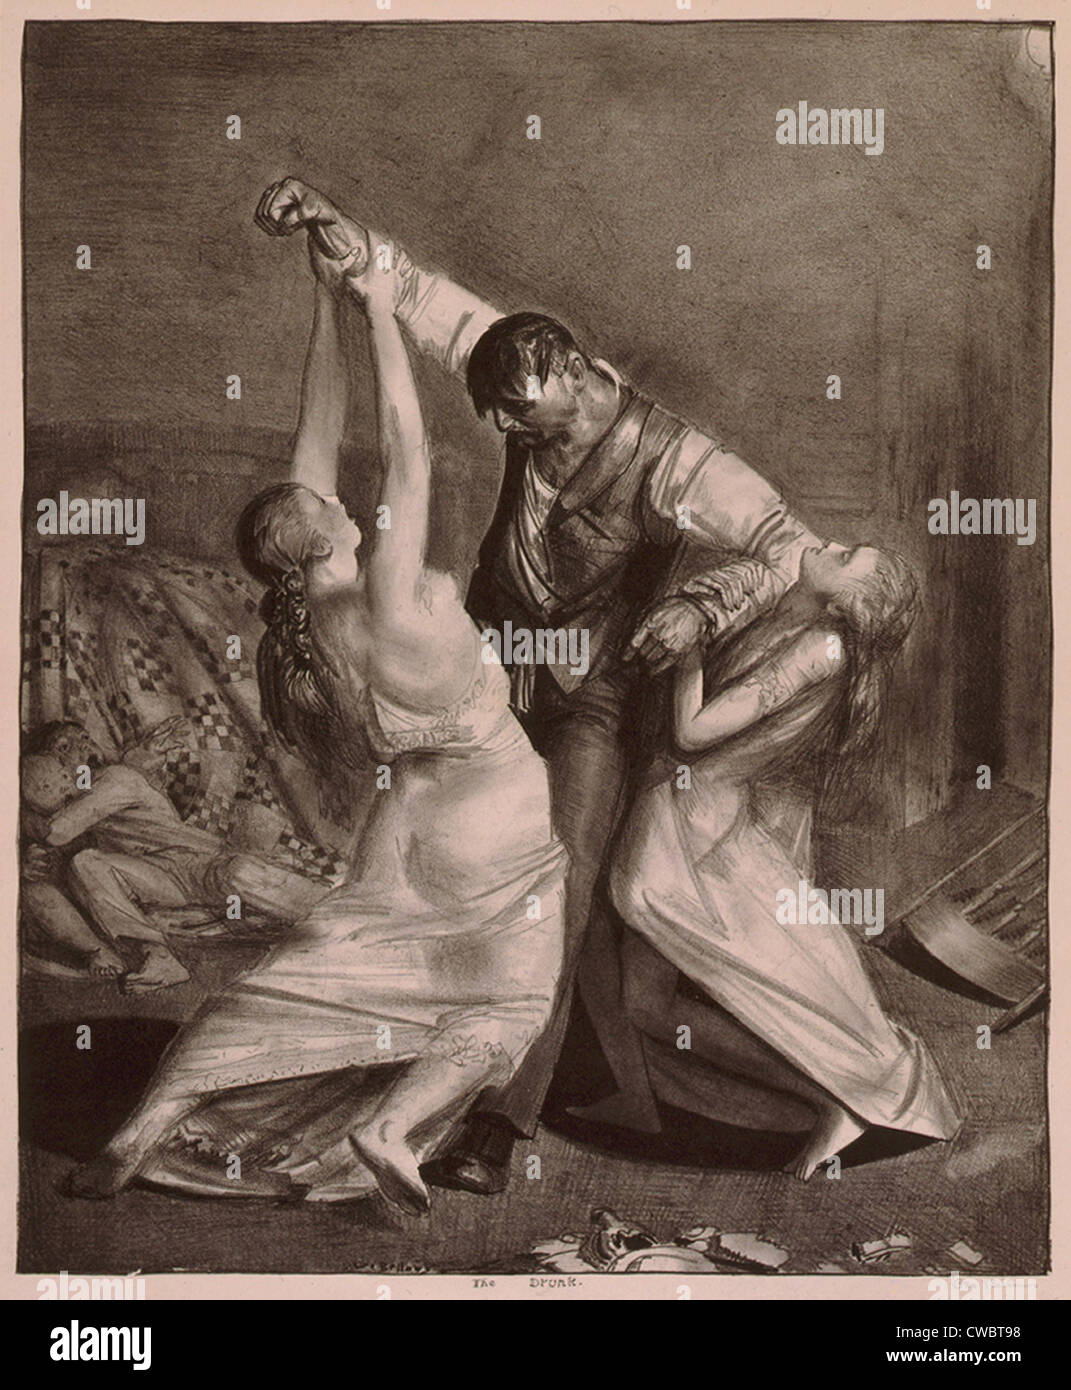 THE DRUNK, a lithograph by George Bellows (1882-1925), shows a woman struggling with her drunken husband. Lithography by Stock Photo